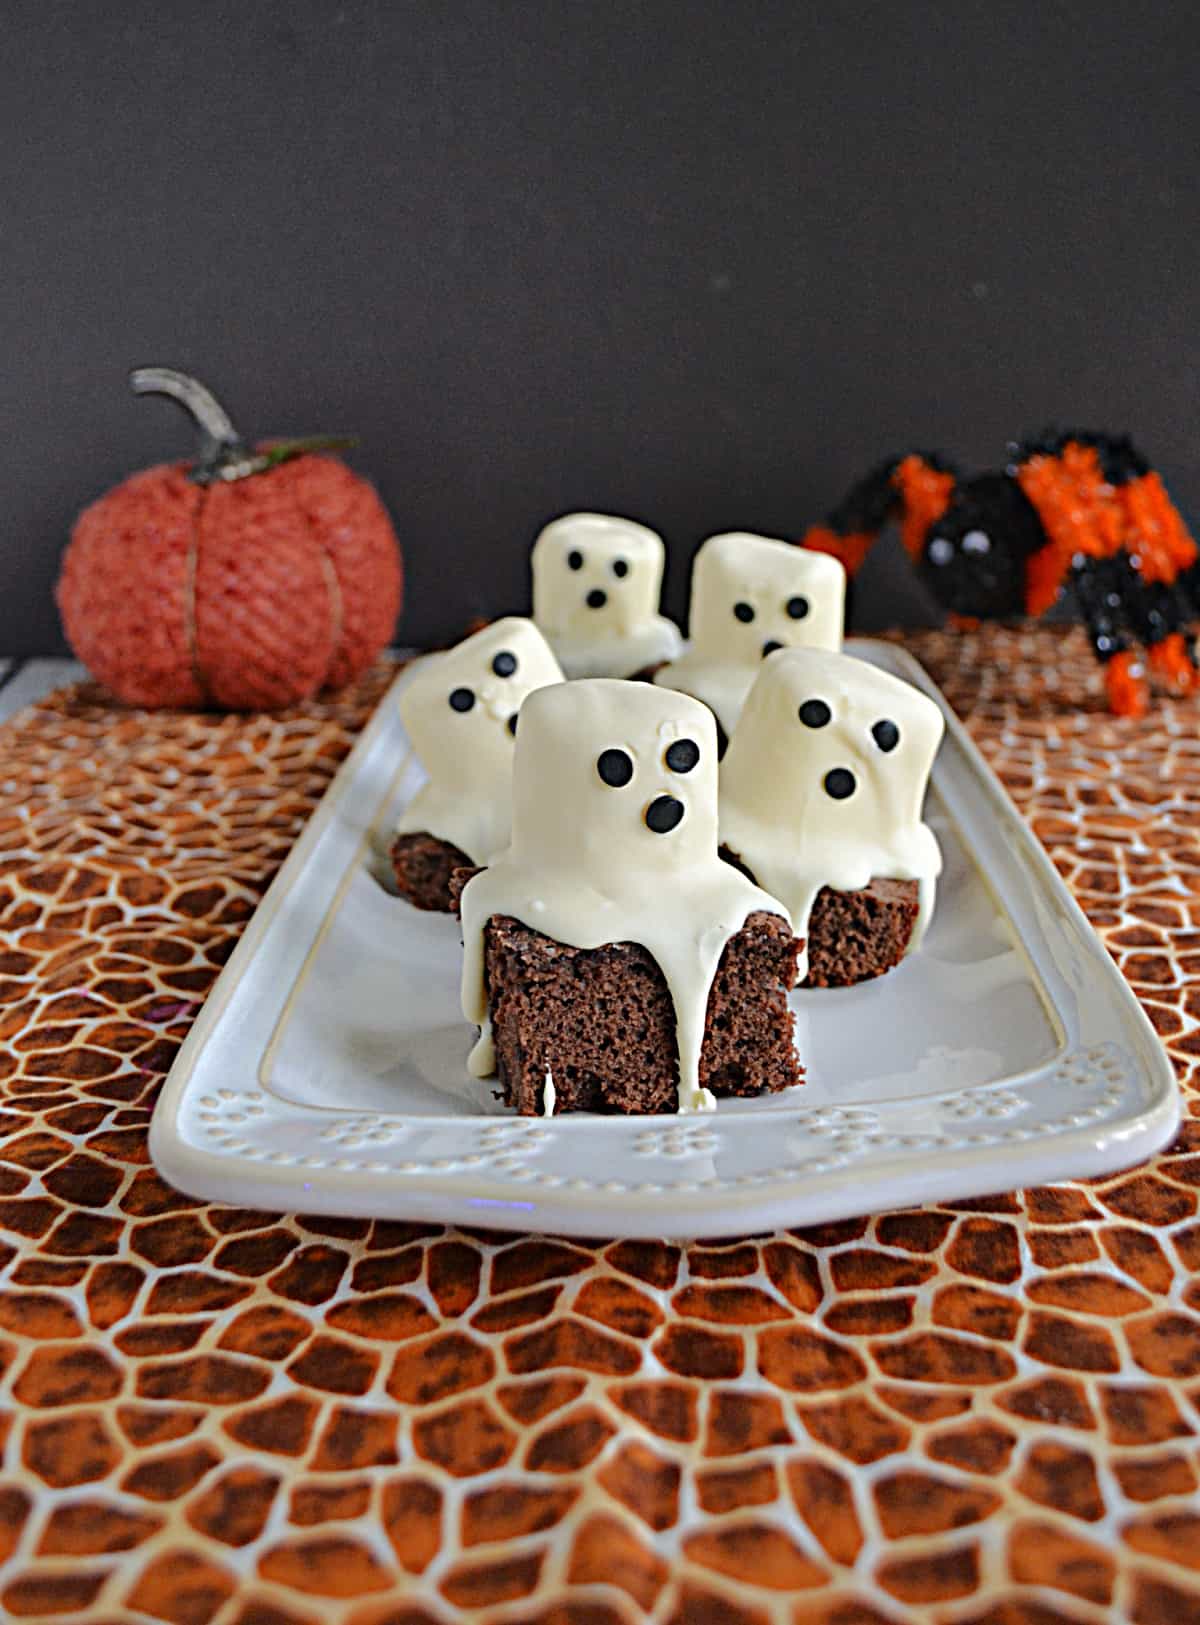 A front view of a platter of brownies with marshmallow ghosts on top.